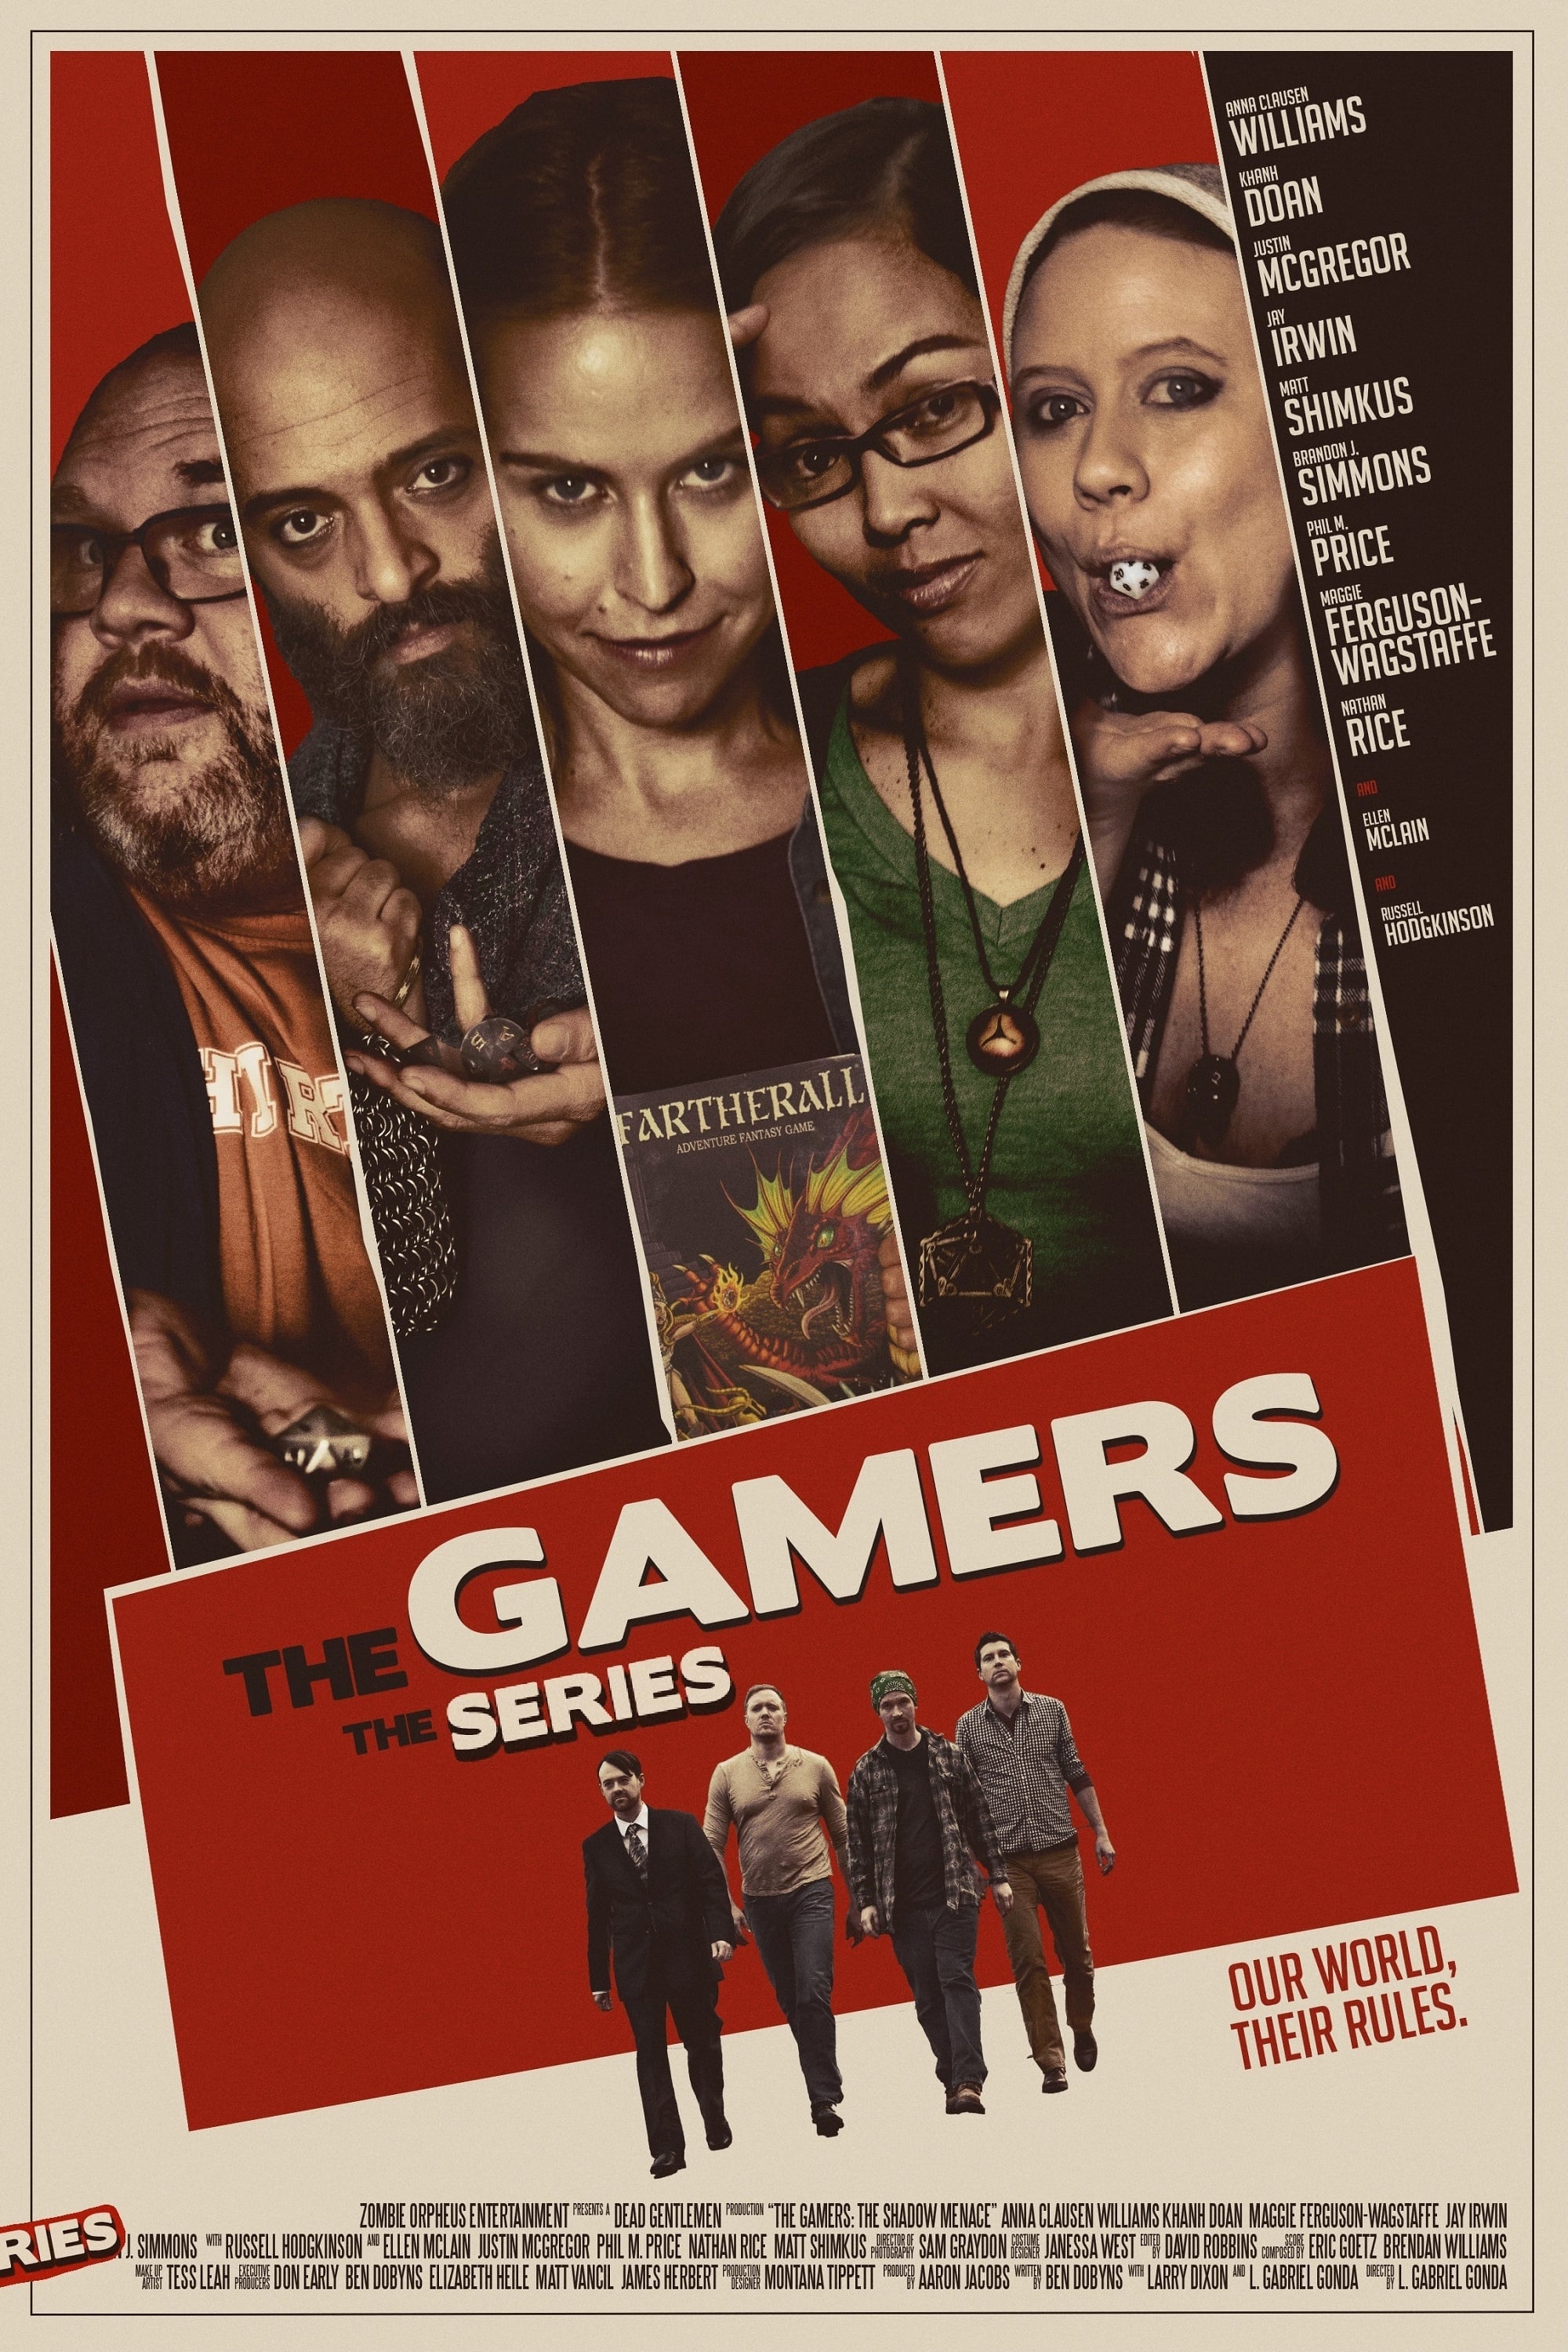 The Gamers: The Series